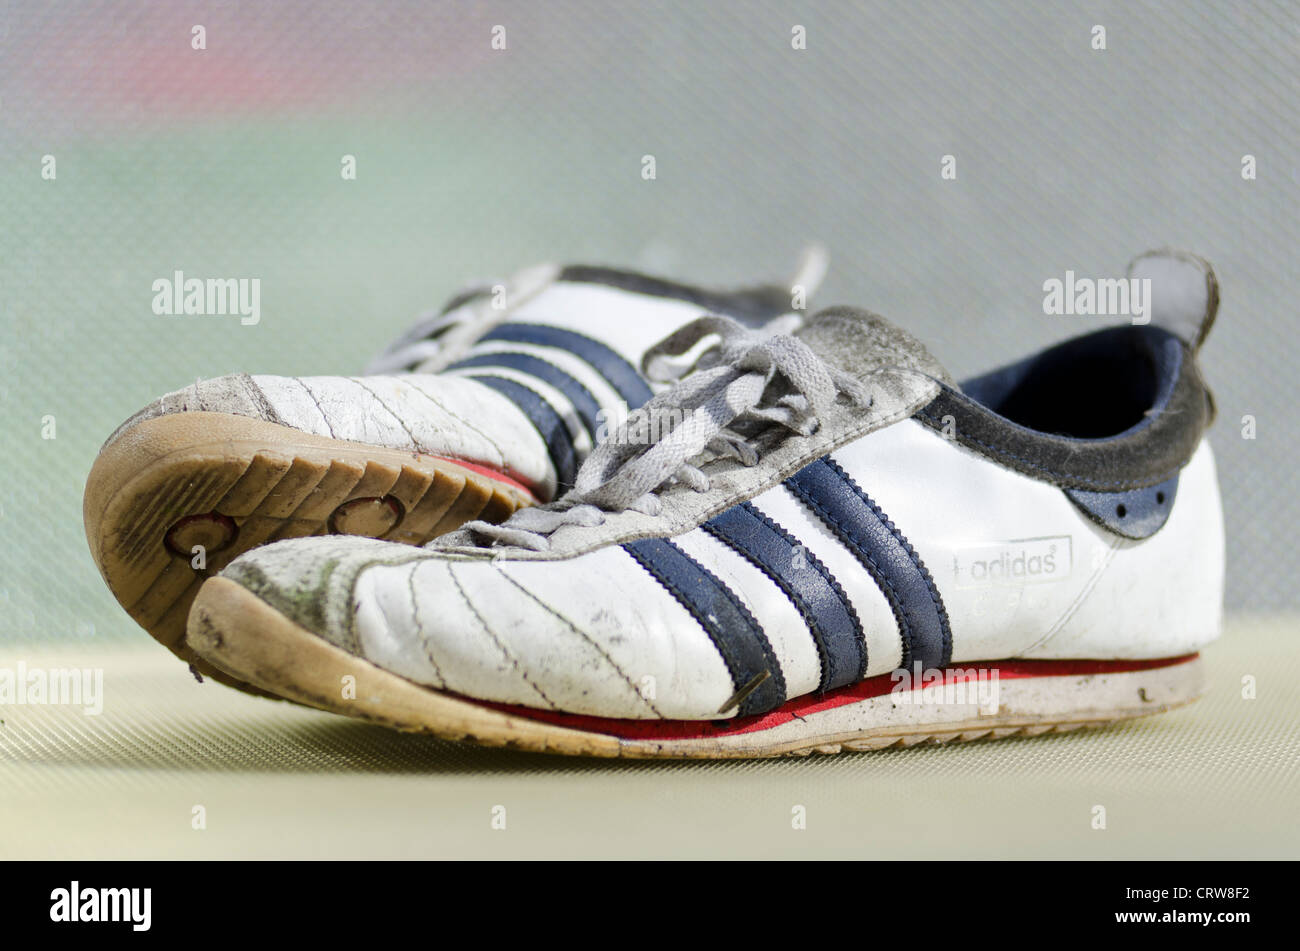 Pair of Worn Adidas Cup 68 Trainers Stock Photo - Alamy